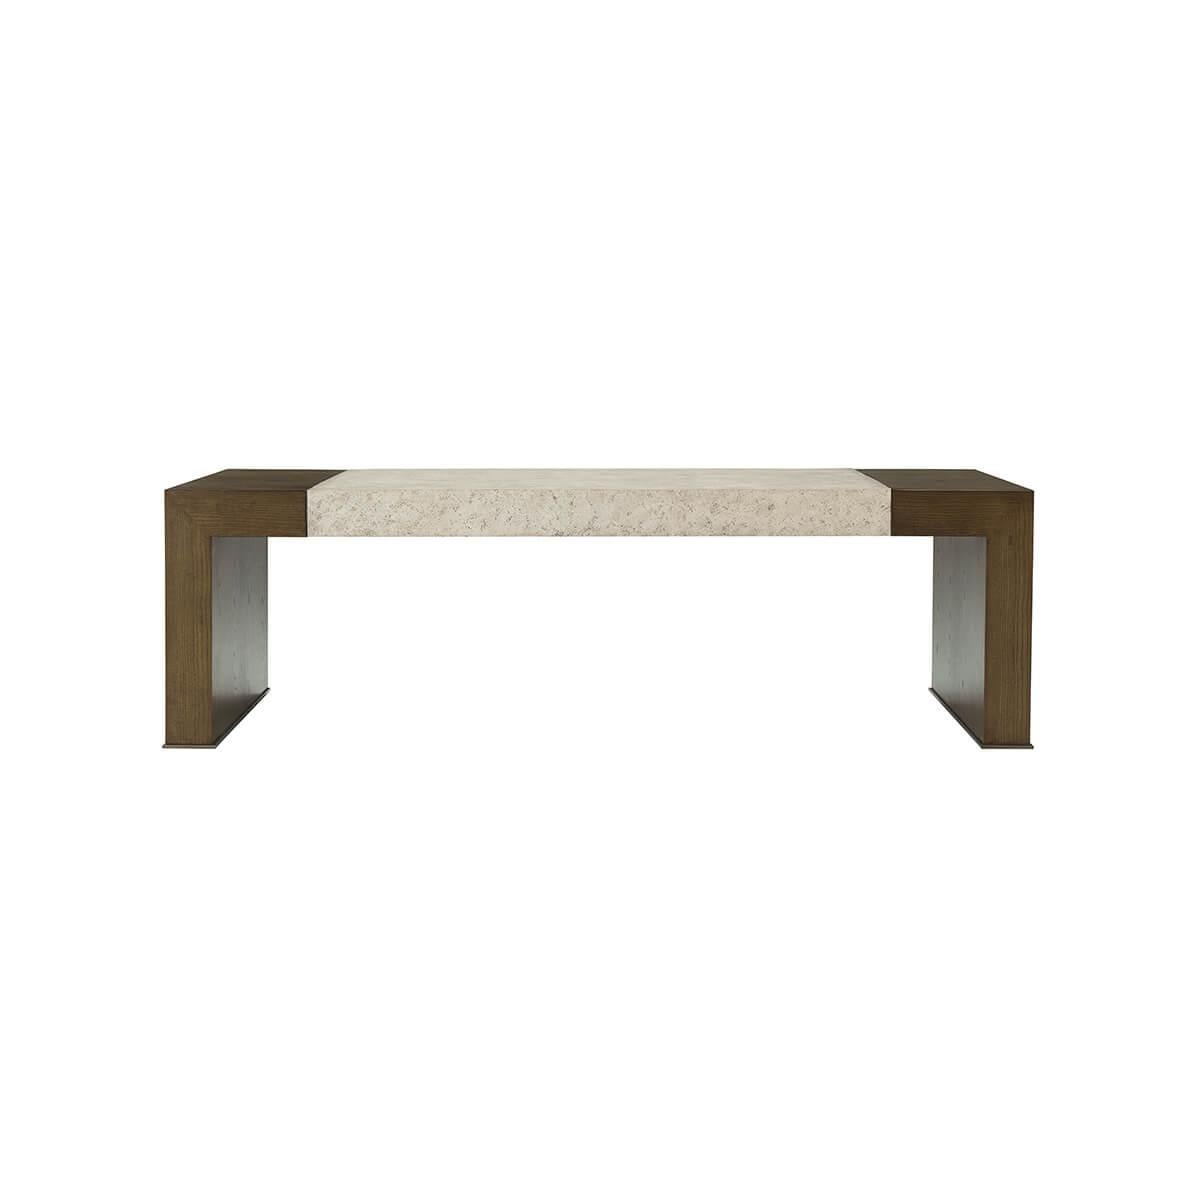 a modern parsons style cocktail table made of figured cathedral ash in our dark earth finish with our exclusive Mineral finish at the top and metal detail at the base of the legs in a bronze finish.
Dimensions: 55